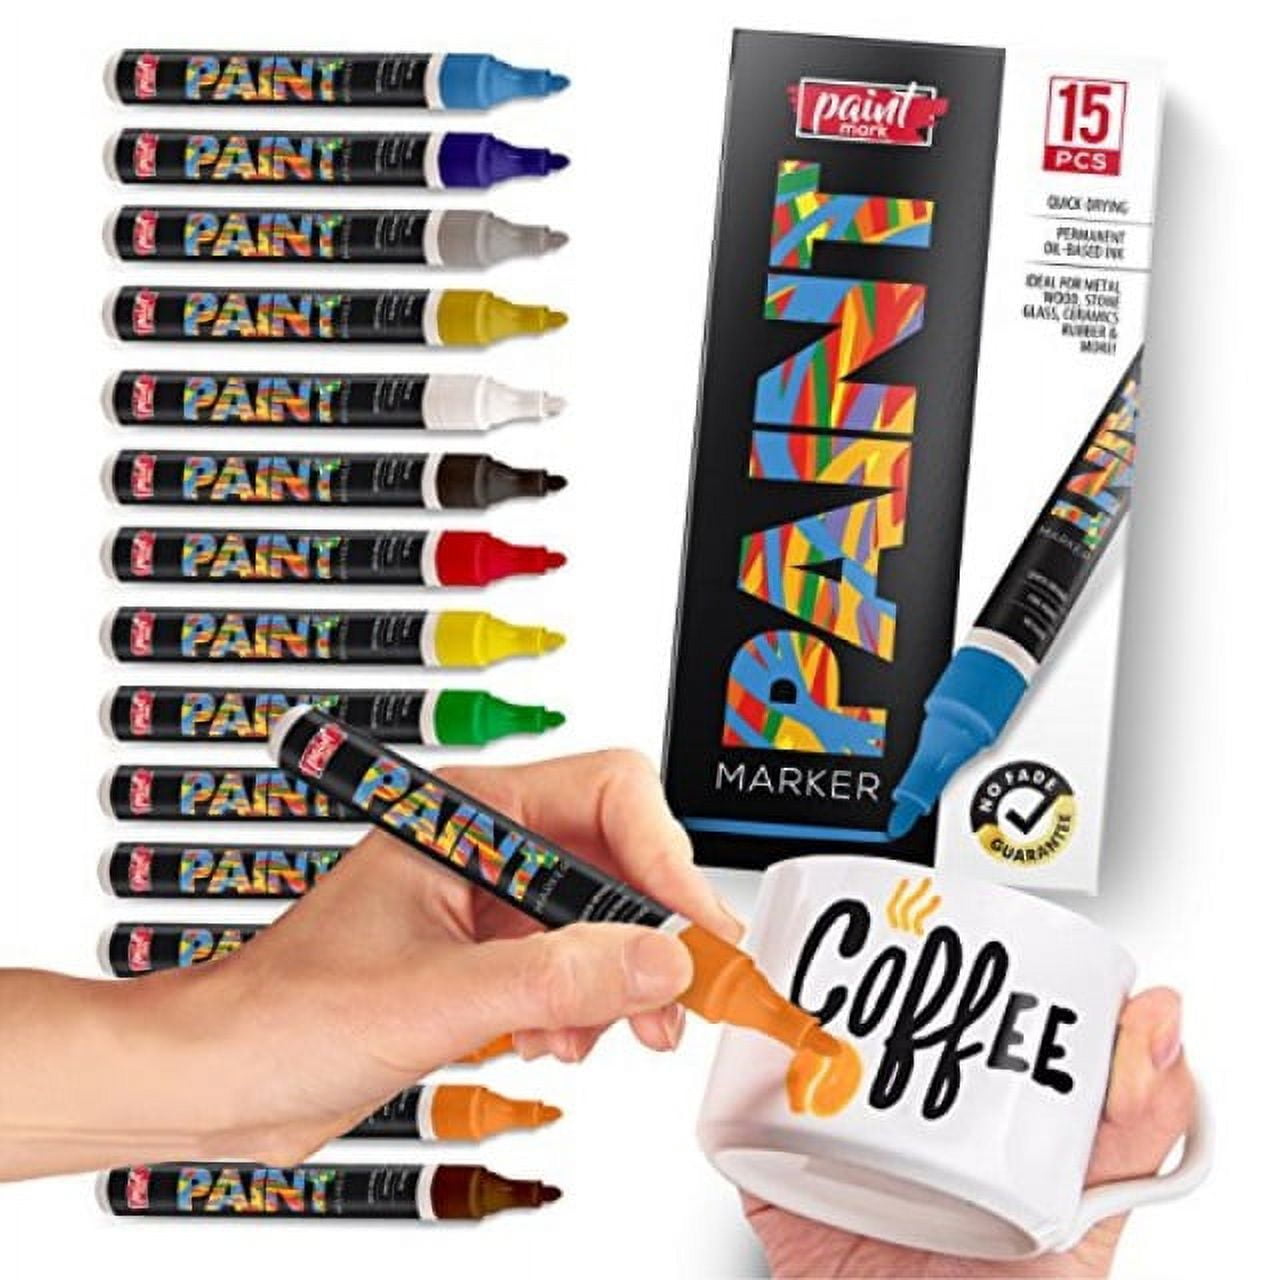 PaintMark Quick-Dry Paint Pens - Write On Anything! Rock, Wood